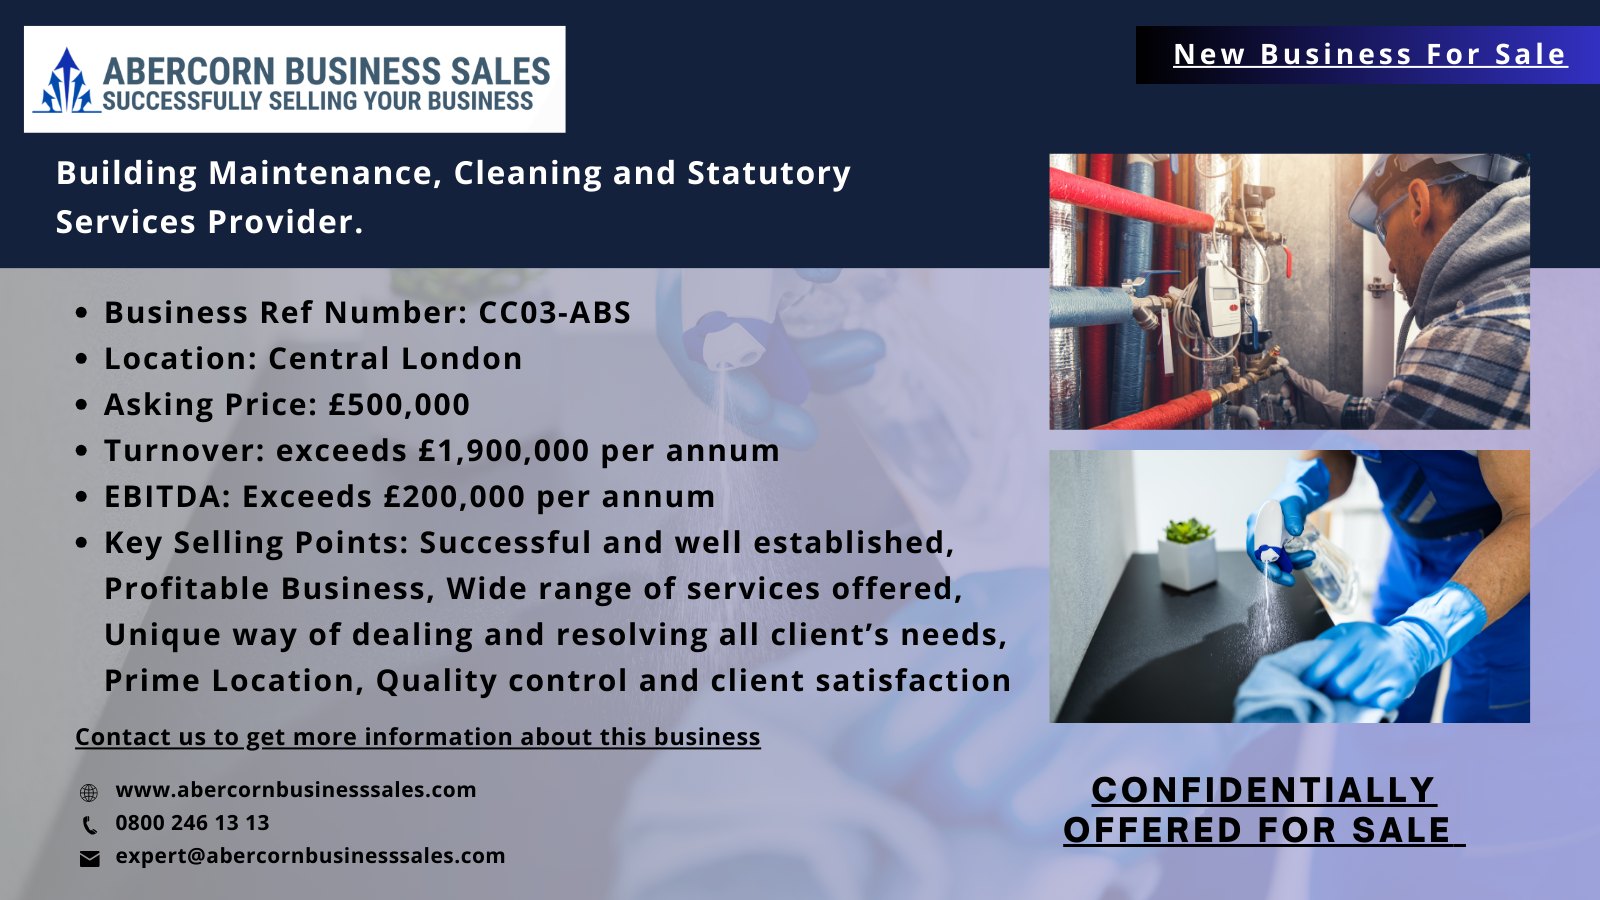 CC03-ABS - Building Maintenance, Cleaning and Statutory Services Provider